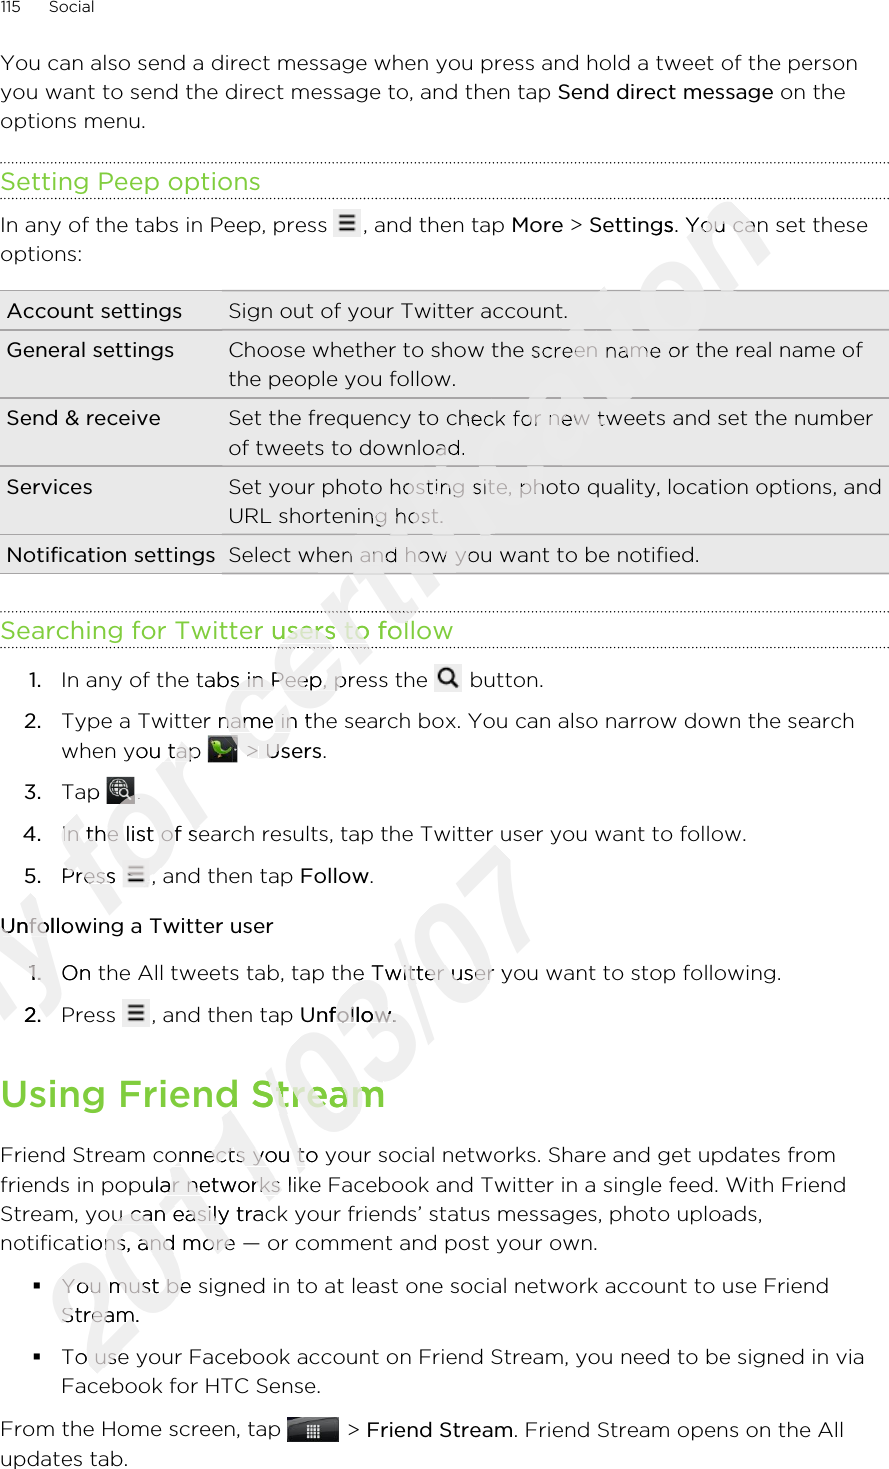 You can also send a direct message when you press and hold a tweet of the personyou want to send the direct message to, and then tap Send direct message on theoptions menu.Setting Peep optionsIn any of the tabs in Peep, press  , and then tap More &gt; Settings. You can set theseoptions:Account settings Sign out of your Twitter account.General settings Choose whether to show the screen name or the real name ofthe people you follow.Send &amp; receive Set the frequency to check for new tweets and set the numberof tweets to download.Services Set your photo hosting site, photo quality, location options, andURL shortening host.Notification settings Select when and how you want to be notified.Searching for Twitter users to follow1. In any of the tabs in Peep, press the   button.2. Type a Twitter name in the search box. You can also narrow down the searchwhen you tap   &gt; Users.3. Tap  .4. In the list of search results, tap the Twitter user you want to follow.5. Press  , and then tap Follow.Unfollowing a Twitter user1. On the All tweets tab, tap the Twitter user you want to stop following.2. Press  , and then tap Unfollow.Using Friend StreamFriend Stream connects you to your social networks. Share and get updates fromfriends in popular networks like Facebook and Twitter in a single feed. With FriendStream, you can easily track your friends’ status messages, photo uploads,notifications, and more — or comment and post your own.§You must be signed in to at least one social network account to use FriendStream.§To use your Facebook account on Friend Stream, you need to be signed in viaFacebook for HTC Sense.From the Home screen, tap   &gt; Friend Stream. Friend Stream opens on the Allupdates tab.115 SocialOnly Unfollowing a Twitter userOnly Unfollowing a Twitter user1.Only 1.On the All tweets tab, tap the Twitter user you want to stop following.Only On the All tweets tab, tap the Twitter user you want to stop following.2.Only 2.for Type a Twitter name in the search box. You can also narrow down the searchfor Type a Twitter name in the search box. You can also narrow down the searchwhen you tap for when you tap Tap for Tap for .for .In the list of search results, tap the Twitter user you want to follow.for In the list of search results, tap the Twitter user you want to follow.Press for Press for , and then tap for , and then tap Unfollowing a Twitter userfor Unfollowing a Twitter usercertification certification Settingscertification Settings. You can set thesecertification . You can set thesecertification Choose whether to show the screen name or the real name ofcertification Choose whether to show the screen name or the real name ofSet the frequency to check for new tweets and set the numbercertification Set the frequency to check for new tweets and set the numberof tweets to download.certification of tweets to download.Set your photo hosting site, photo quality, location options, andcertification Set your photo hosting site, photo quality, location options, andURL shortening host.certification URL shortening host.Select when and how you want to be notified.certification Select when and how you want to be notified.certification certification certification certification certification certification Searching for Twitter users to followcertification Searching for Twitter users to followcertification certification certification In any of the tabs in Peep, press the certification In any of the tabs in Peep, press the Type a Twitter name in the search box. You can also narrow down the searchcertification Type a Twitter name in the search box. You can also narrow down the searchcertification  &gt; certification  &gt; Userscertification Users2011/03/07In the list of search results, tap the Twitter user you want to follow.2011/03/07In the list of search results, tap the Twitter user you want to follow.2011/03/07On the All tweets tab, tap the Twitter user you want to stop following.2011/03/07On the All tweets tab, tap the Twitter user you want to stop following.Unfollow2011/03/07Unfollow.2011/03/07.Using Friend Stream2011/03/07Using Friend StreamFriend Stream connects you to your social networks. Share and get updates from2011/03/07Friend Stream connects you to your social networks. Share and get updates fromfriends in popular networks like Facebook and Twitter in a single feed. With Friend2011/03/07friends in popular networks like Facebook and Twitter in a single feed. With FriendStream, you can easily track your friends’ status messages, photo uploads,2011/03/07Stream, you can easily track your friends’ status messages, photo uploads,2011/03/07notifications, and more — or comment and post your own.2011/03/07notifications, and more — or comment and post your own.You must be signed in to at least one social network account to use Friend2011/03/07You must be signed in to at least one social network account to use FriendStream.2011/03/07Stream.To use your Facebook account on Friend Stream, you need to be signed in via2011/03/07To use your Facebook account on Friend Stream, you need to be signed in via